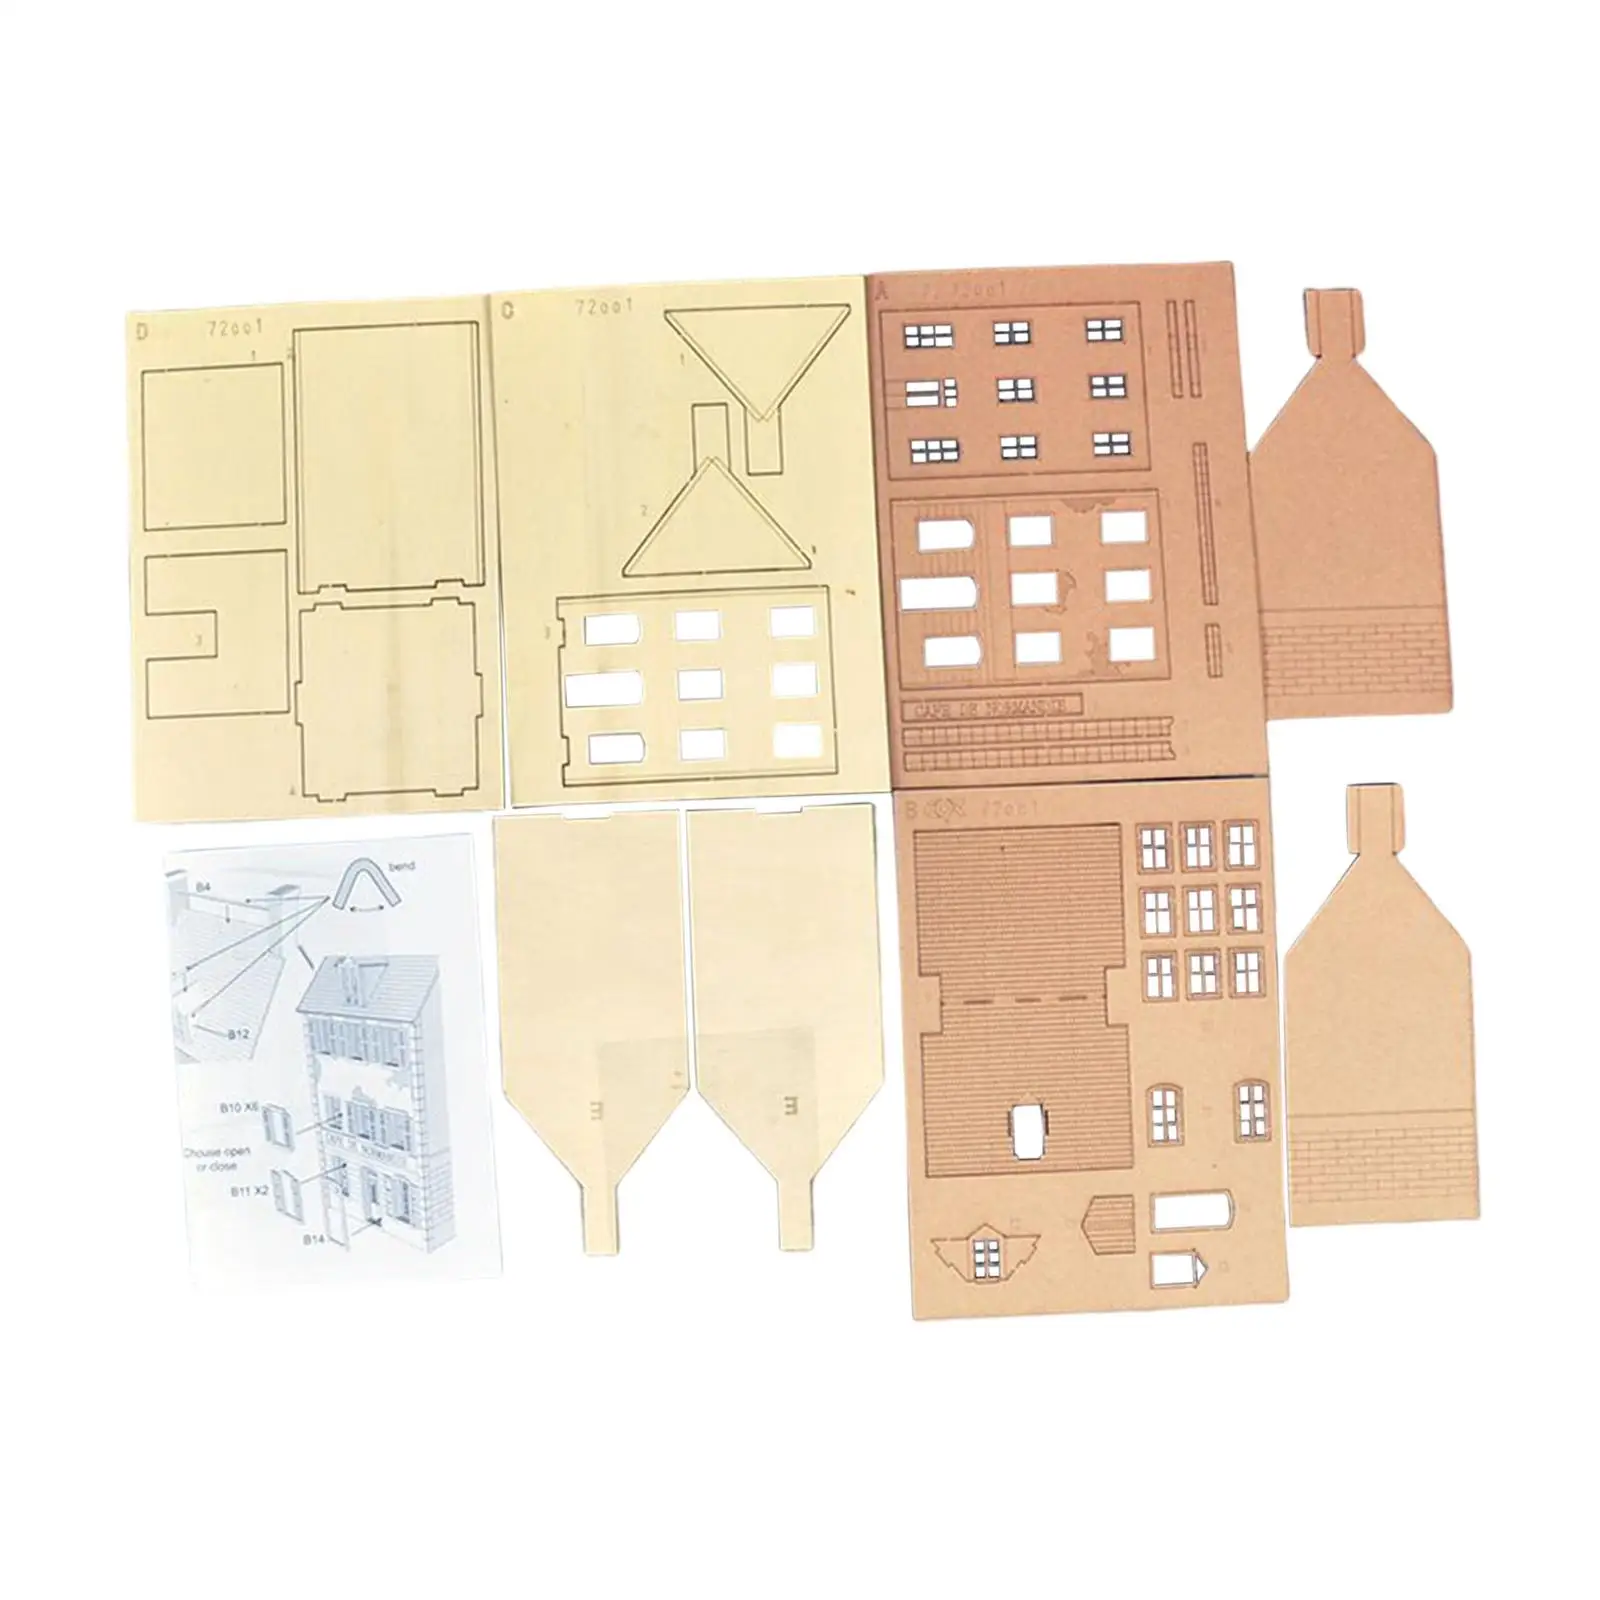 3D Wooden Puzzle Miniature Model House kits for Scenery Layout Home Decor